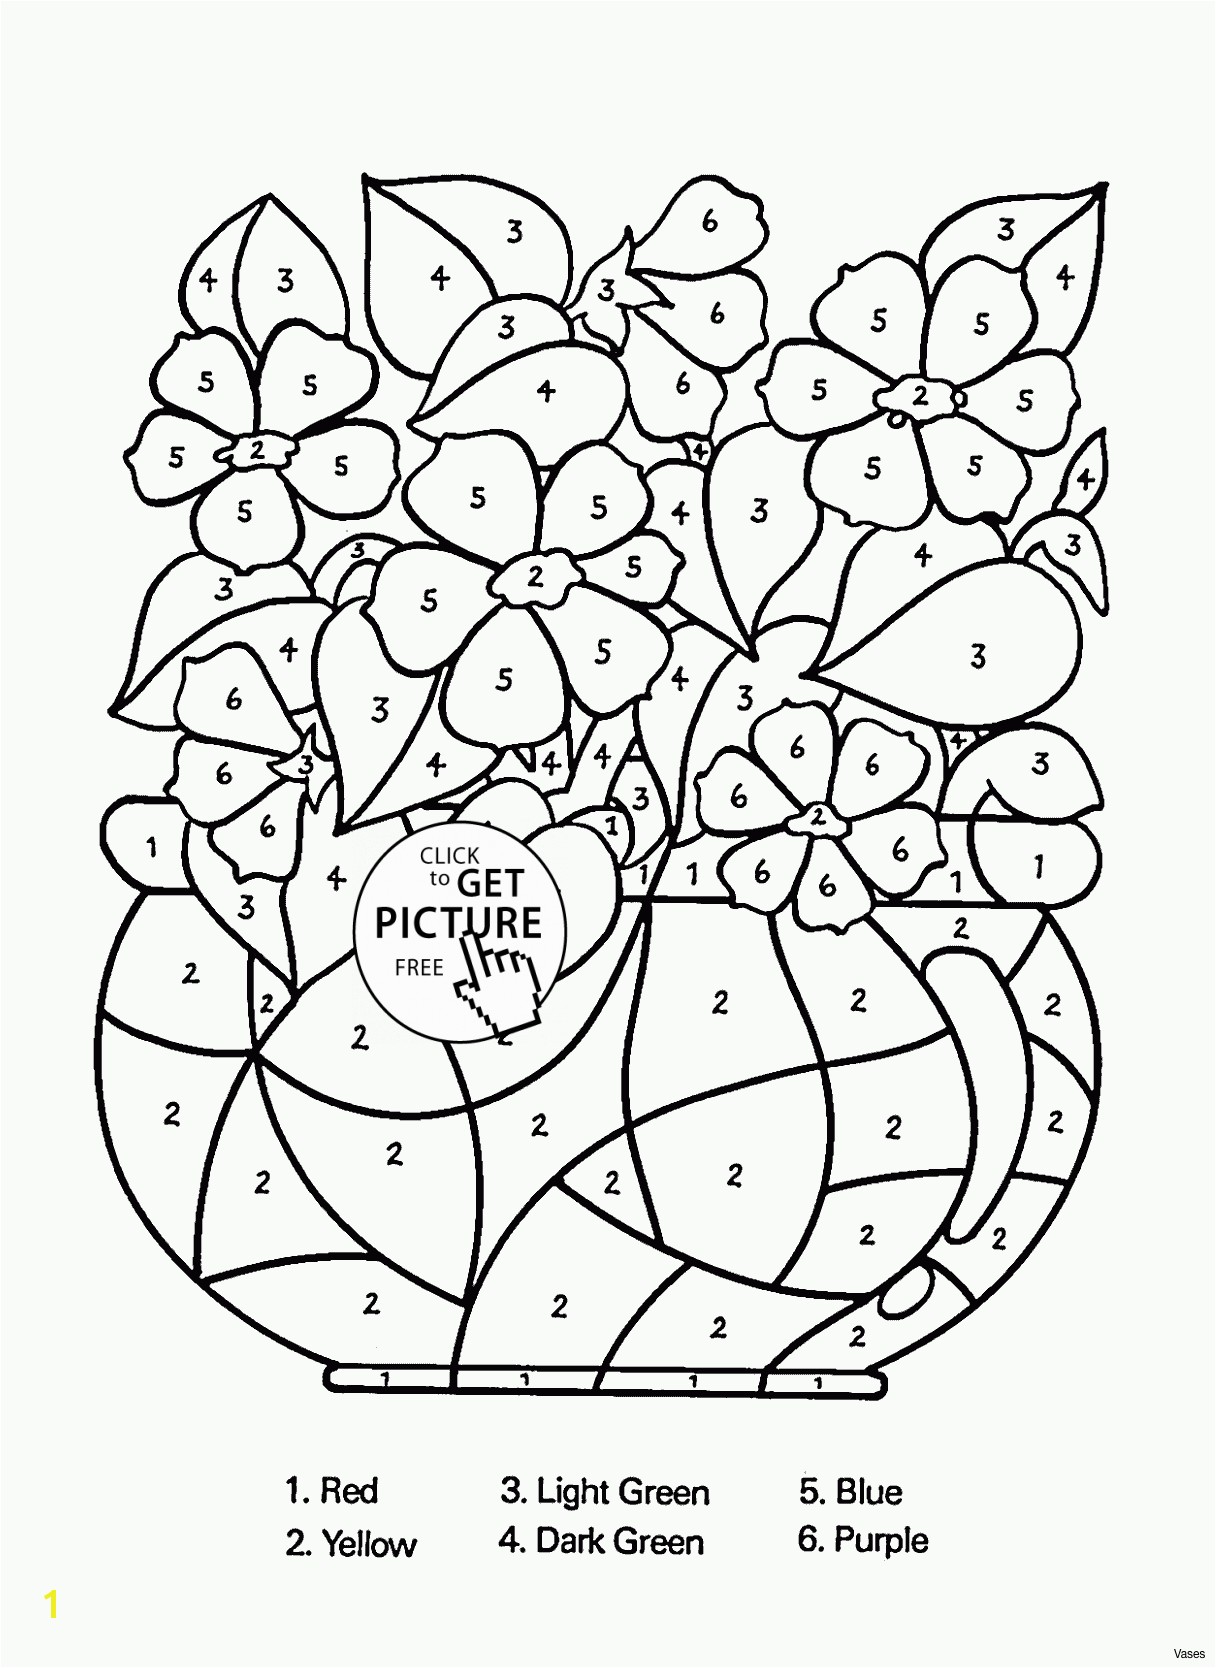 Fall Leaves Coloring Pages Awesome Fall Leaf Coloring Sheet Design